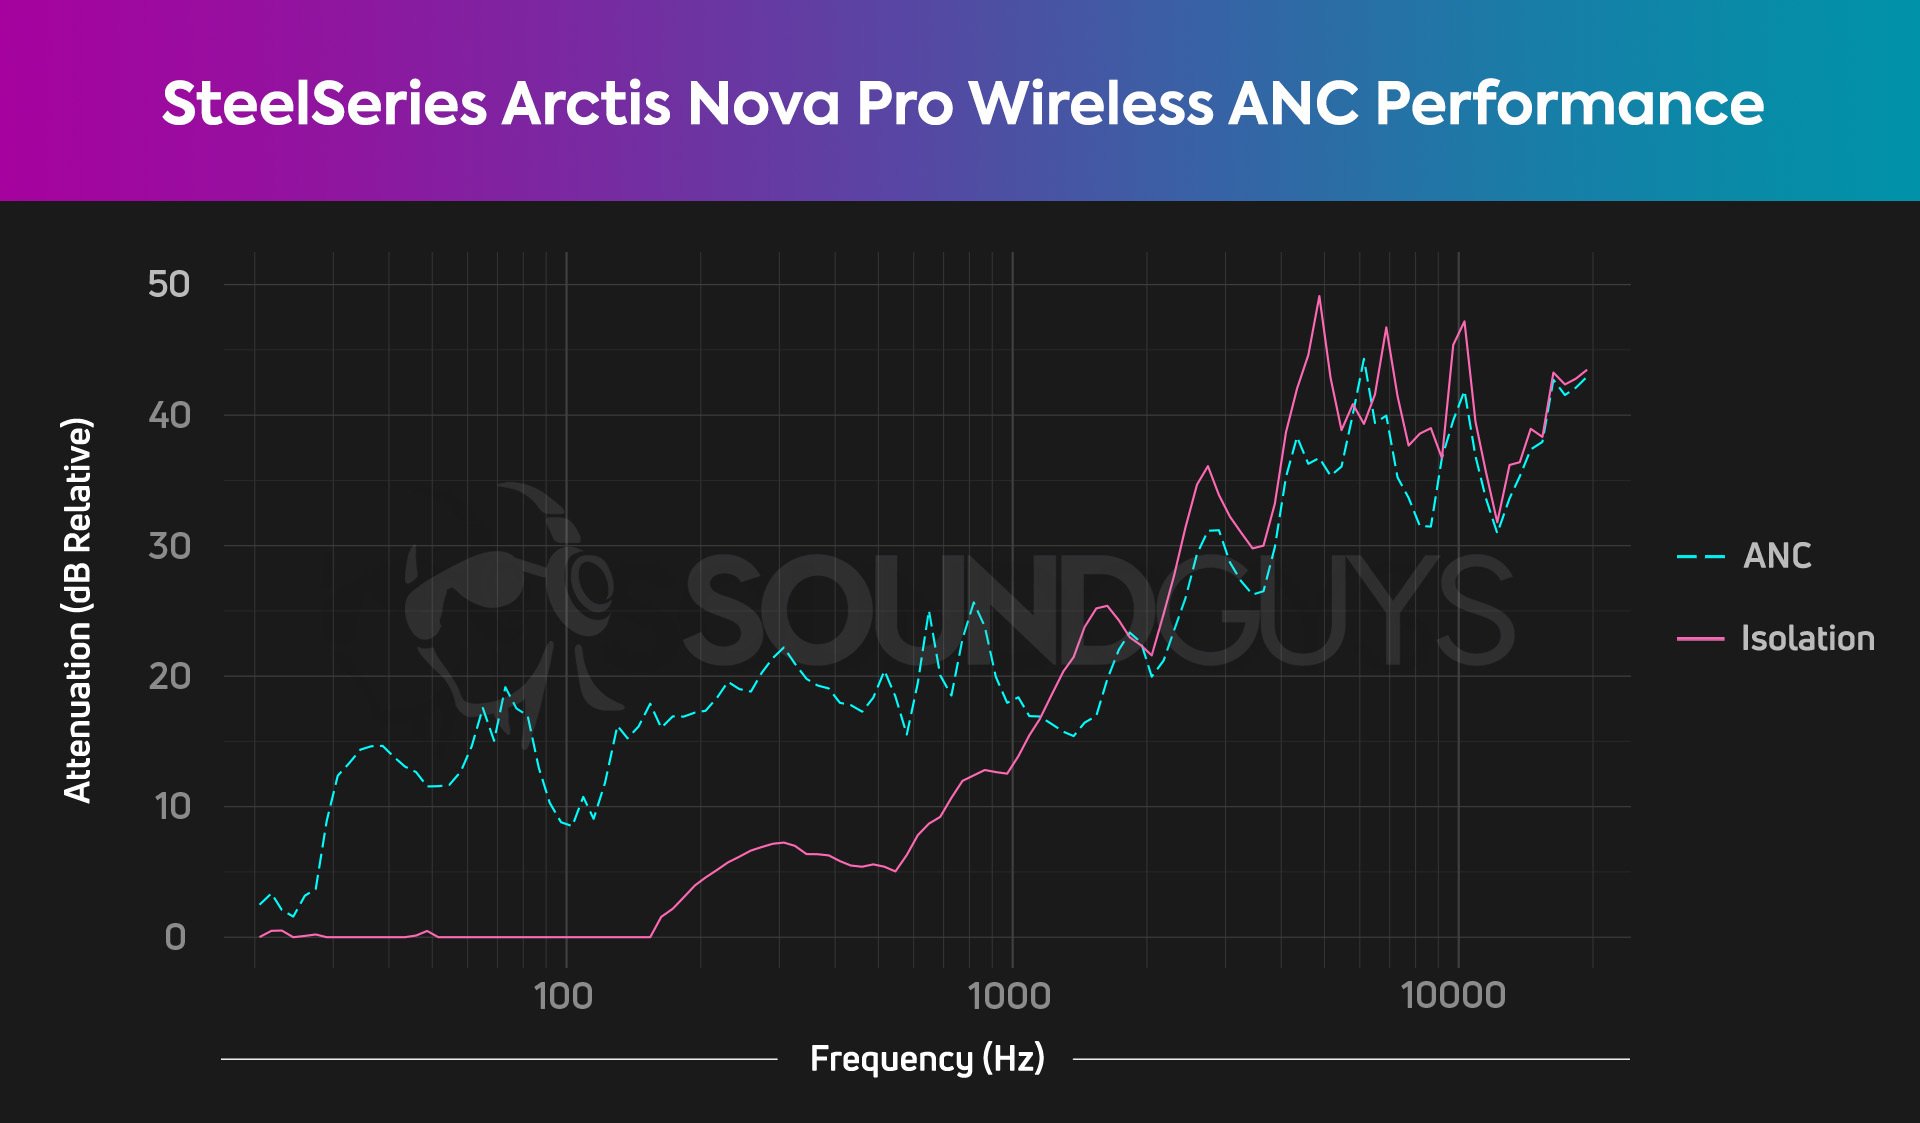 The ANC and isolation chart for the SteelSeries Arctis Nova Pro Wireless showing fairly impressive active noise canceling performance.